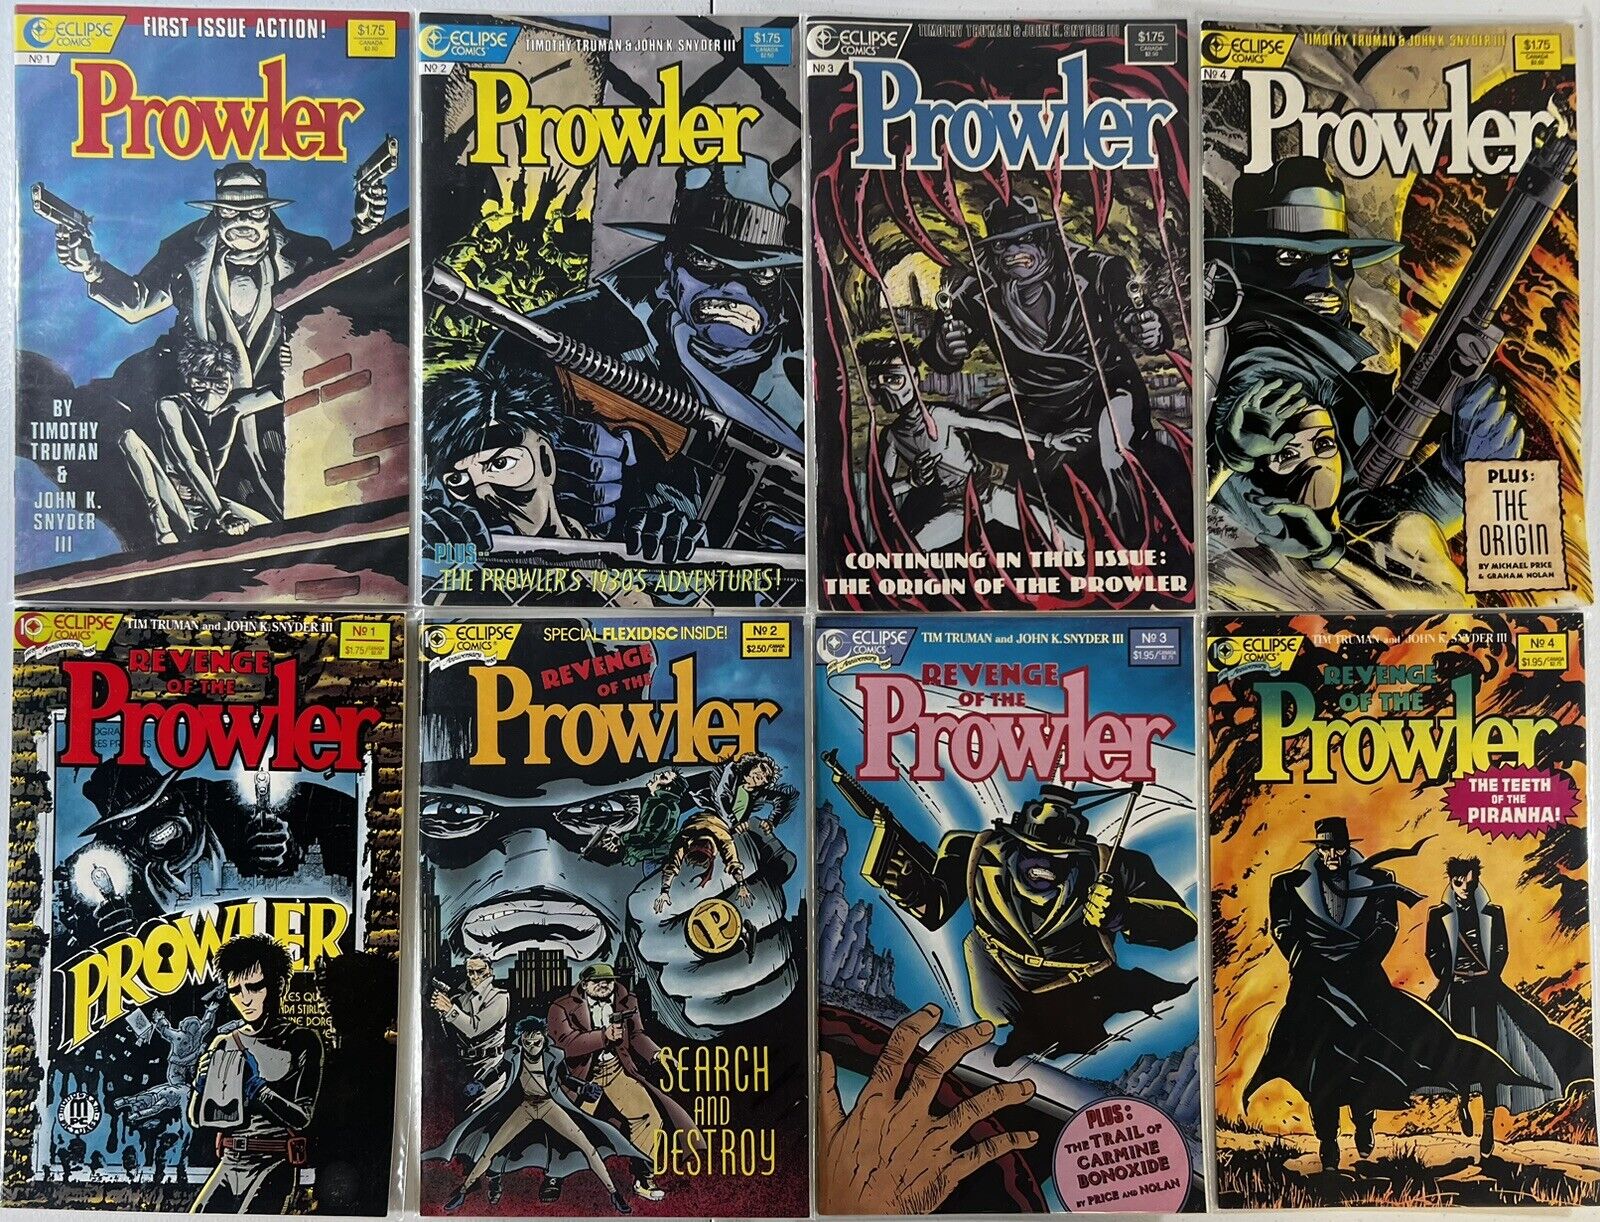 Prowler #1-4 + Revenge of the Prowler #1-4 Complete Run Eclipse 1987 Lot of 8